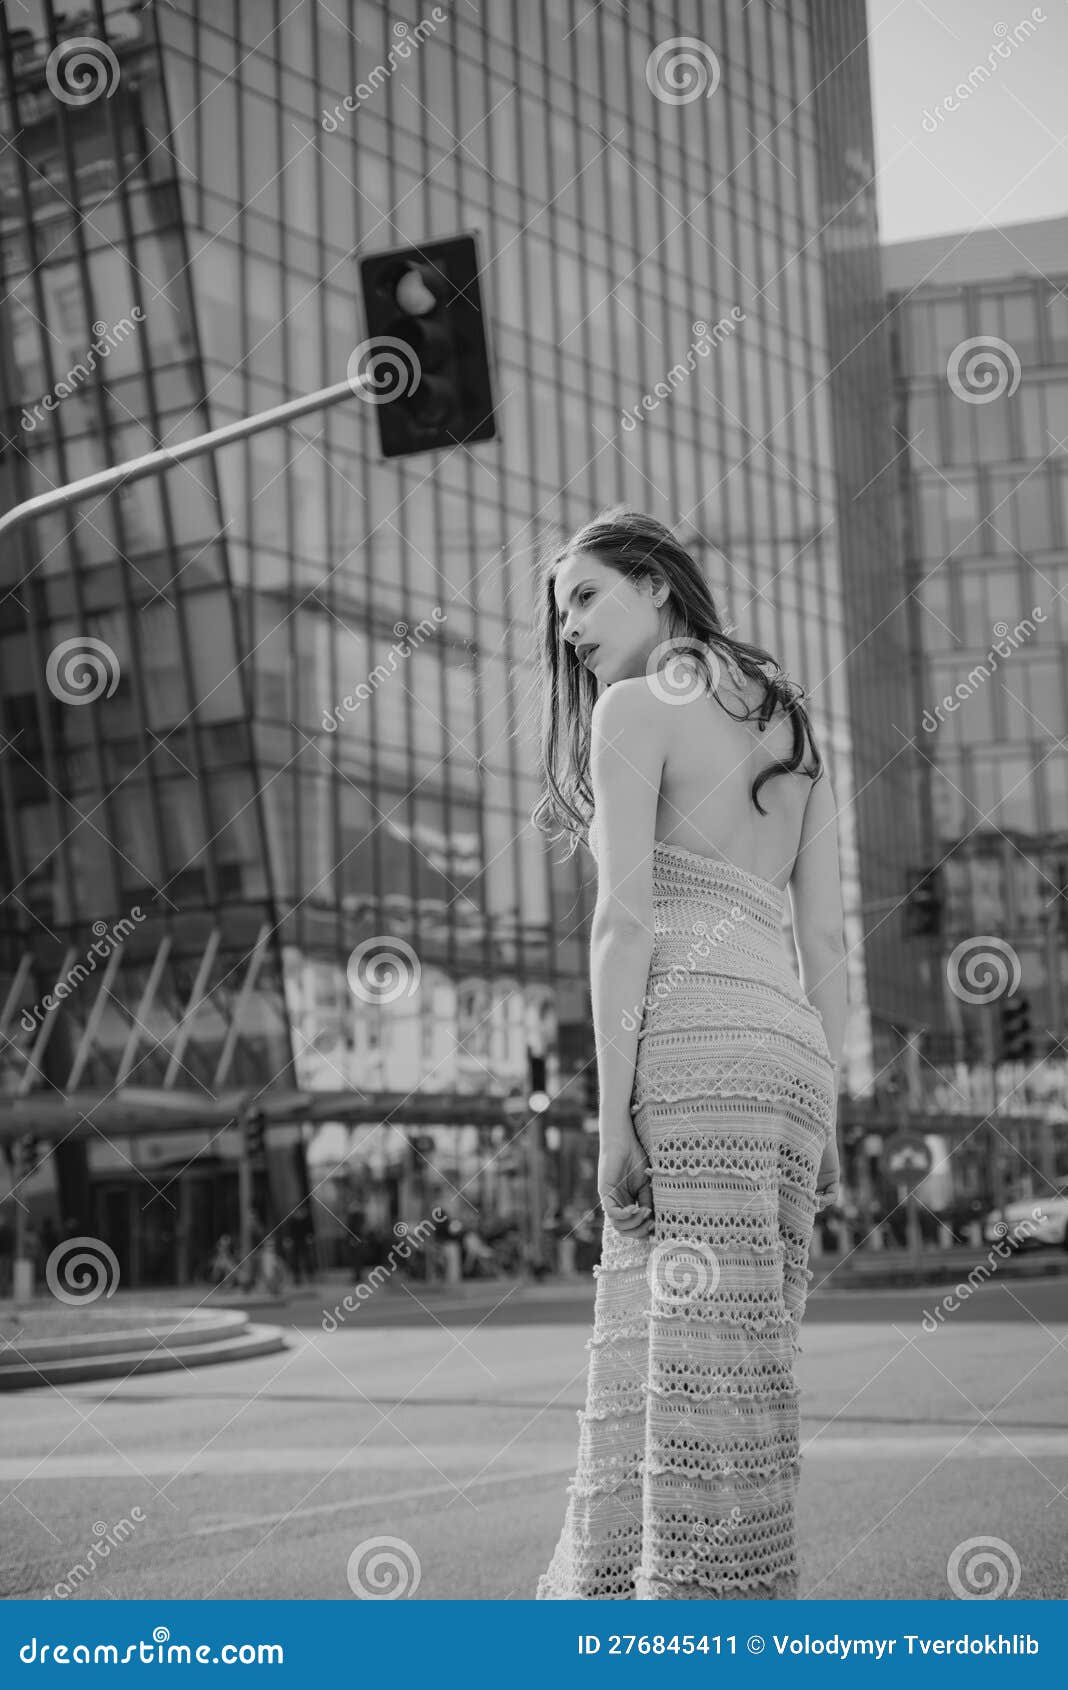 City Life. Woman in Modern Town. Fashion Street Style Vogue ...